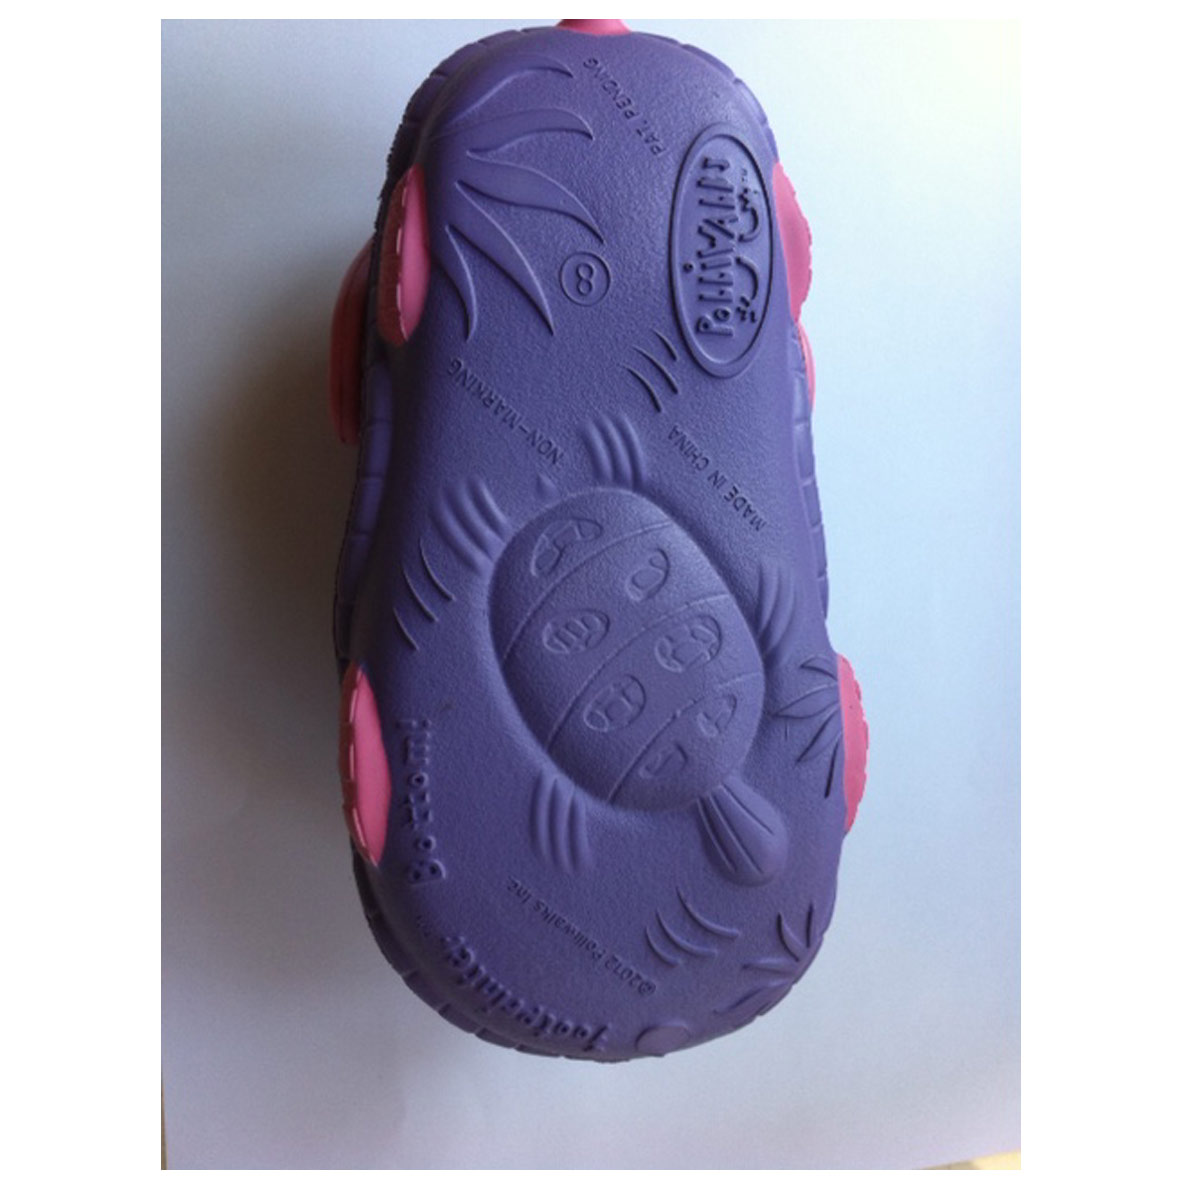 Polliwalks : Toddler shoes Tory  the Turtle  Purple # 6